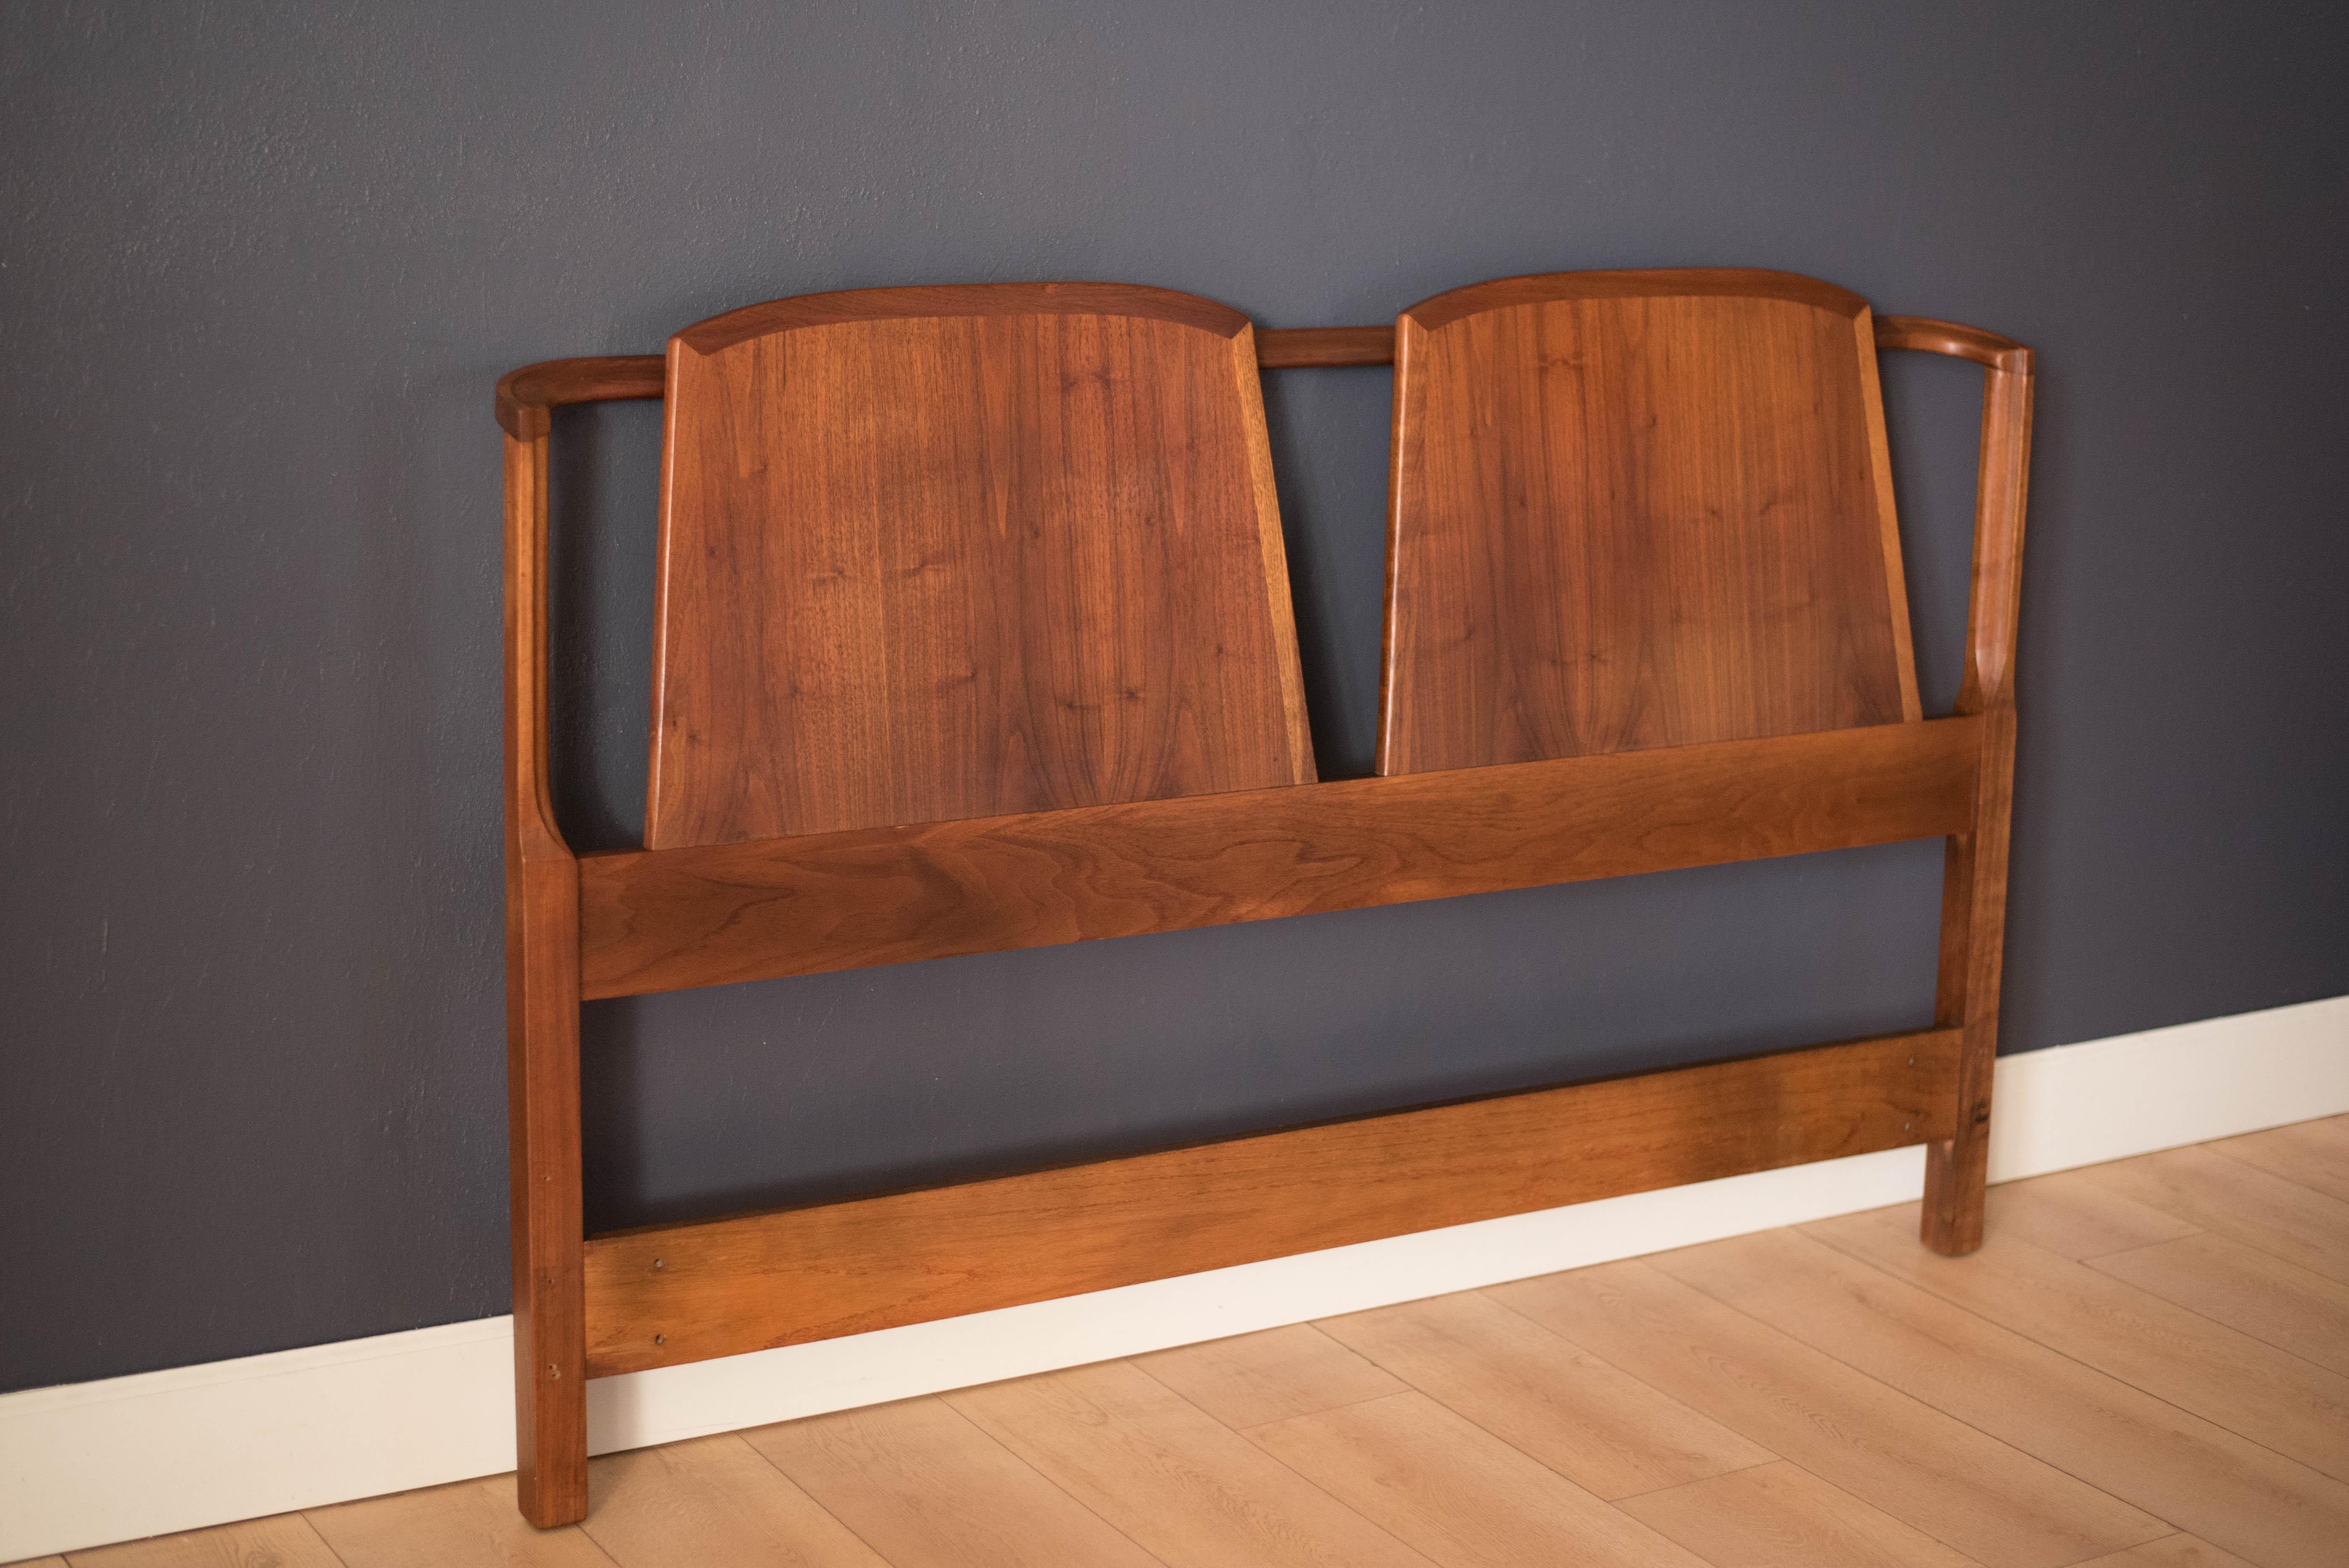 Vintage queen size headboard by Dillingham Manufacturing Co., circa 1960s. This piece features a walnut double back panel with a slim curved frame. Pre-drilled settings in place for bed frame attachments.